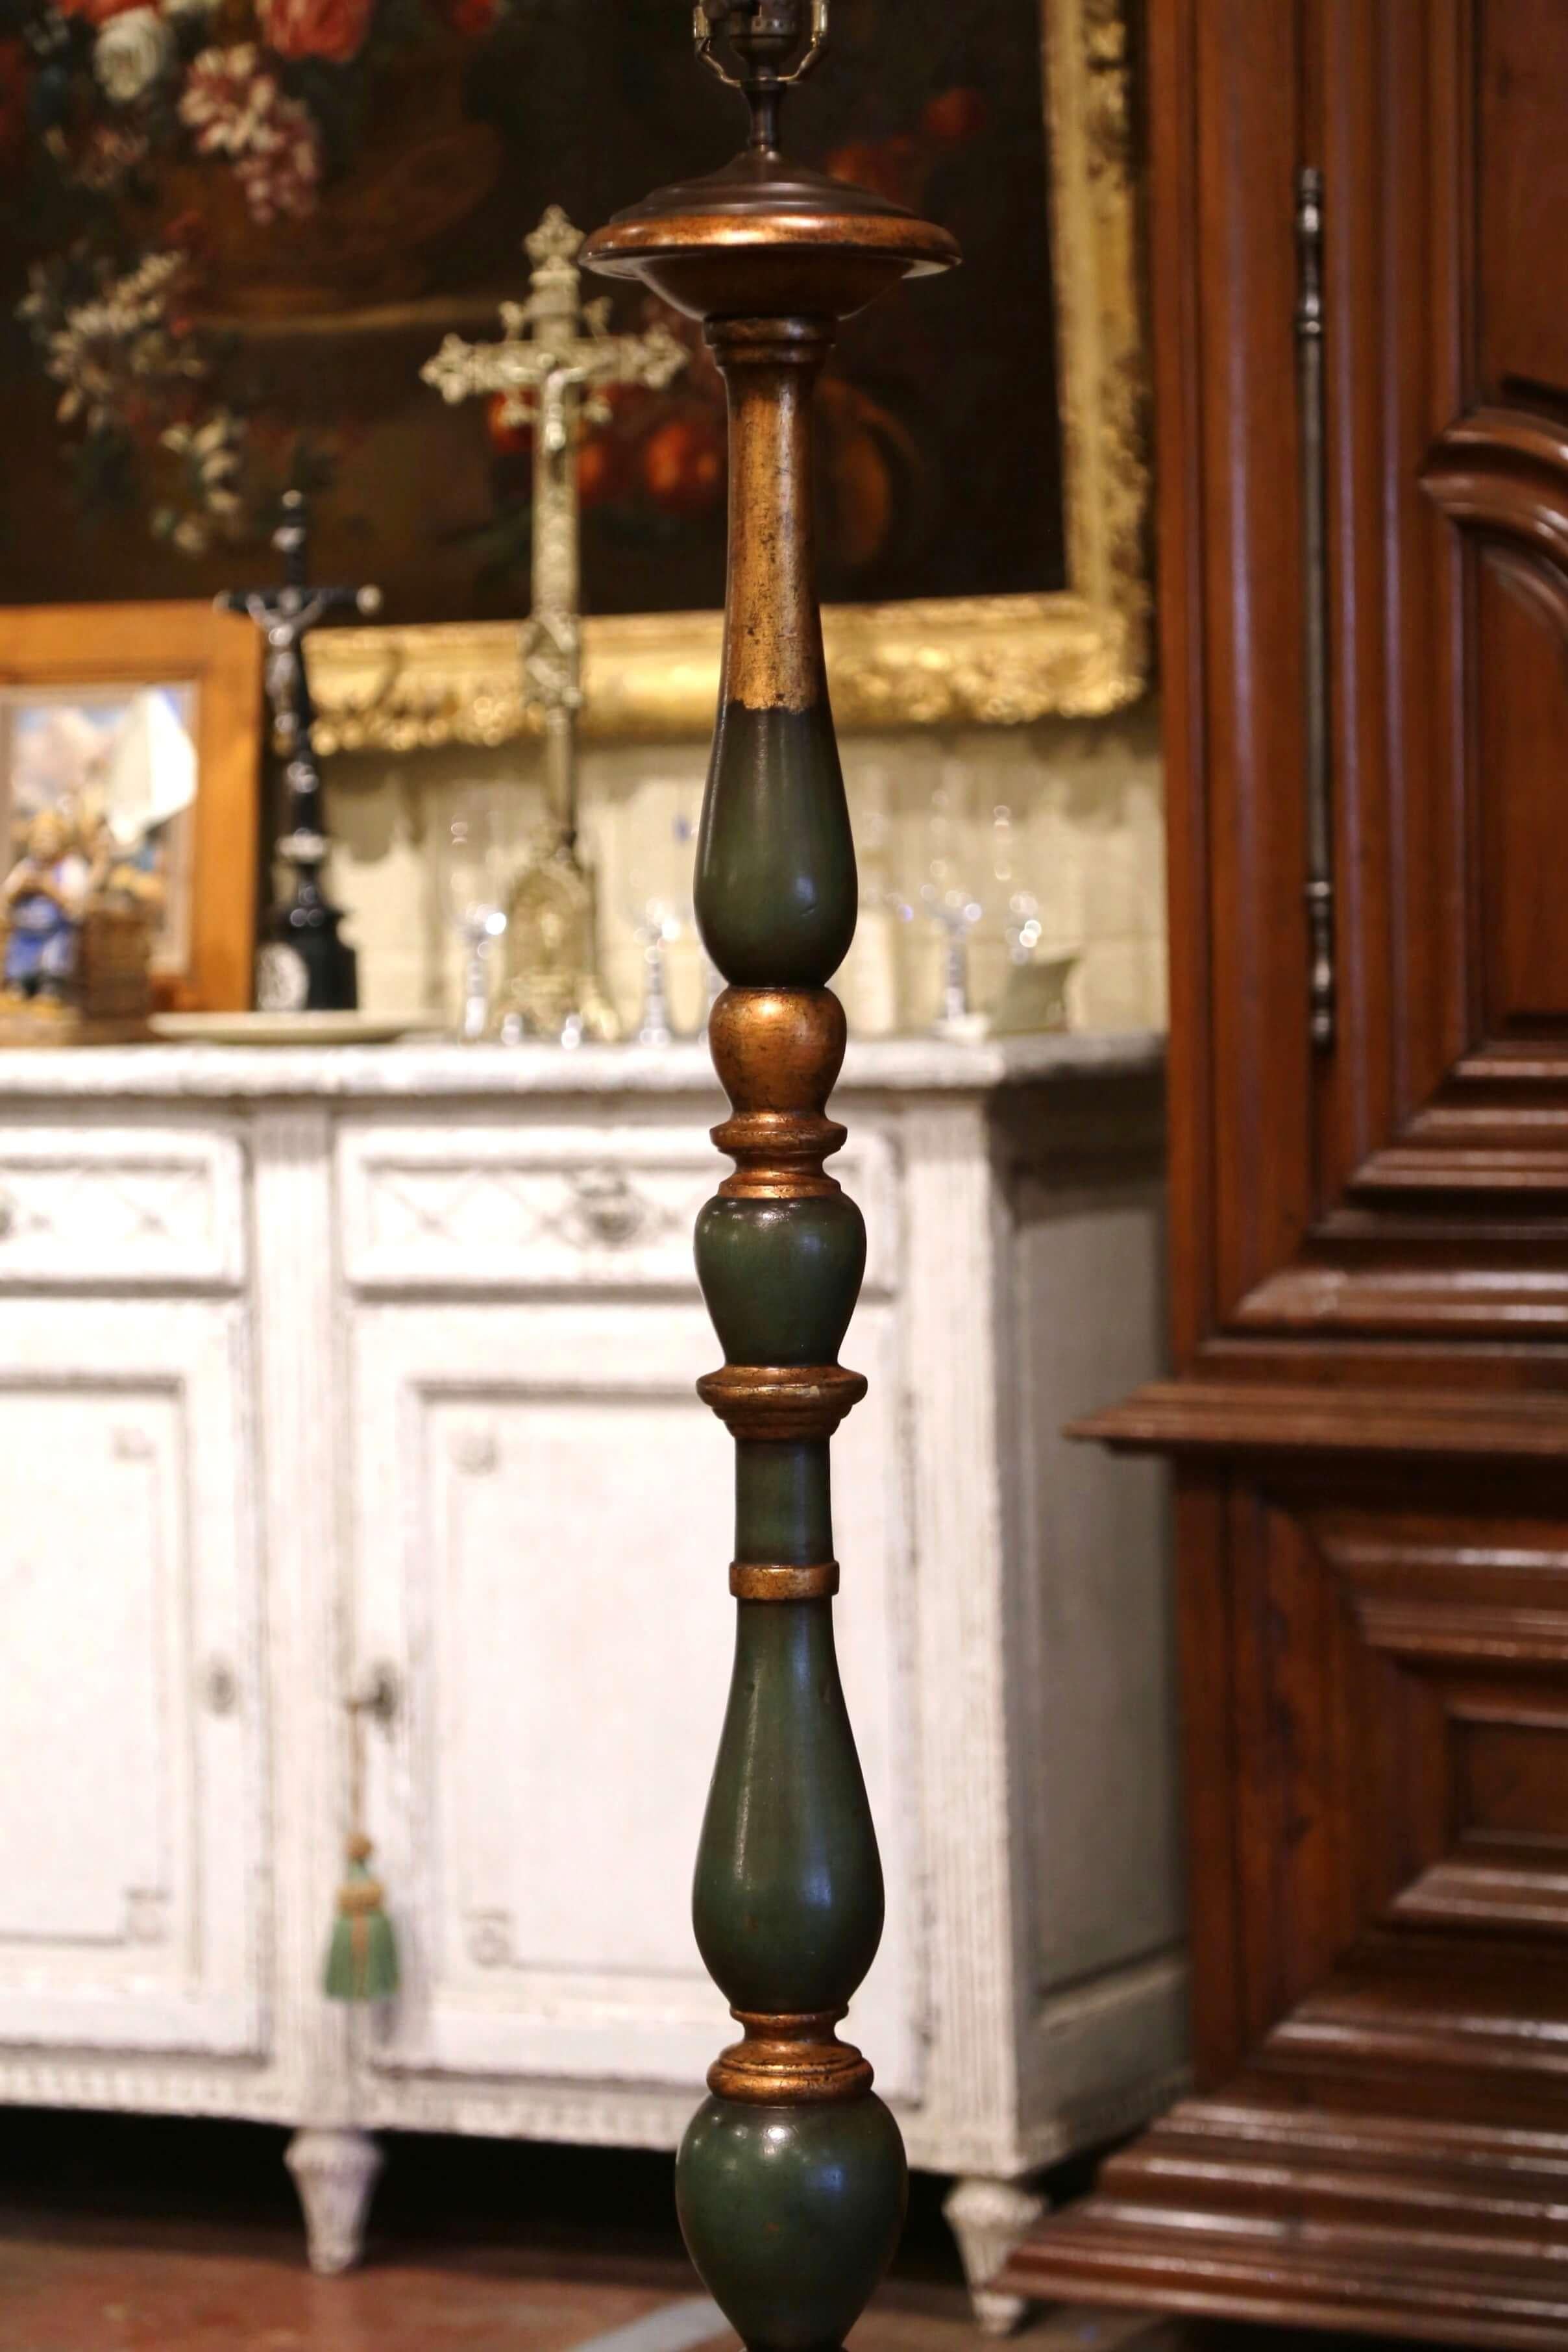 This elegant antique floor lamp was crafted in France, circa 1920. The lamp stands on a round stem over a long carved and turned stem; the fixture is dressed with a single center light. The floor lamp is in excellent condition commensurate with age